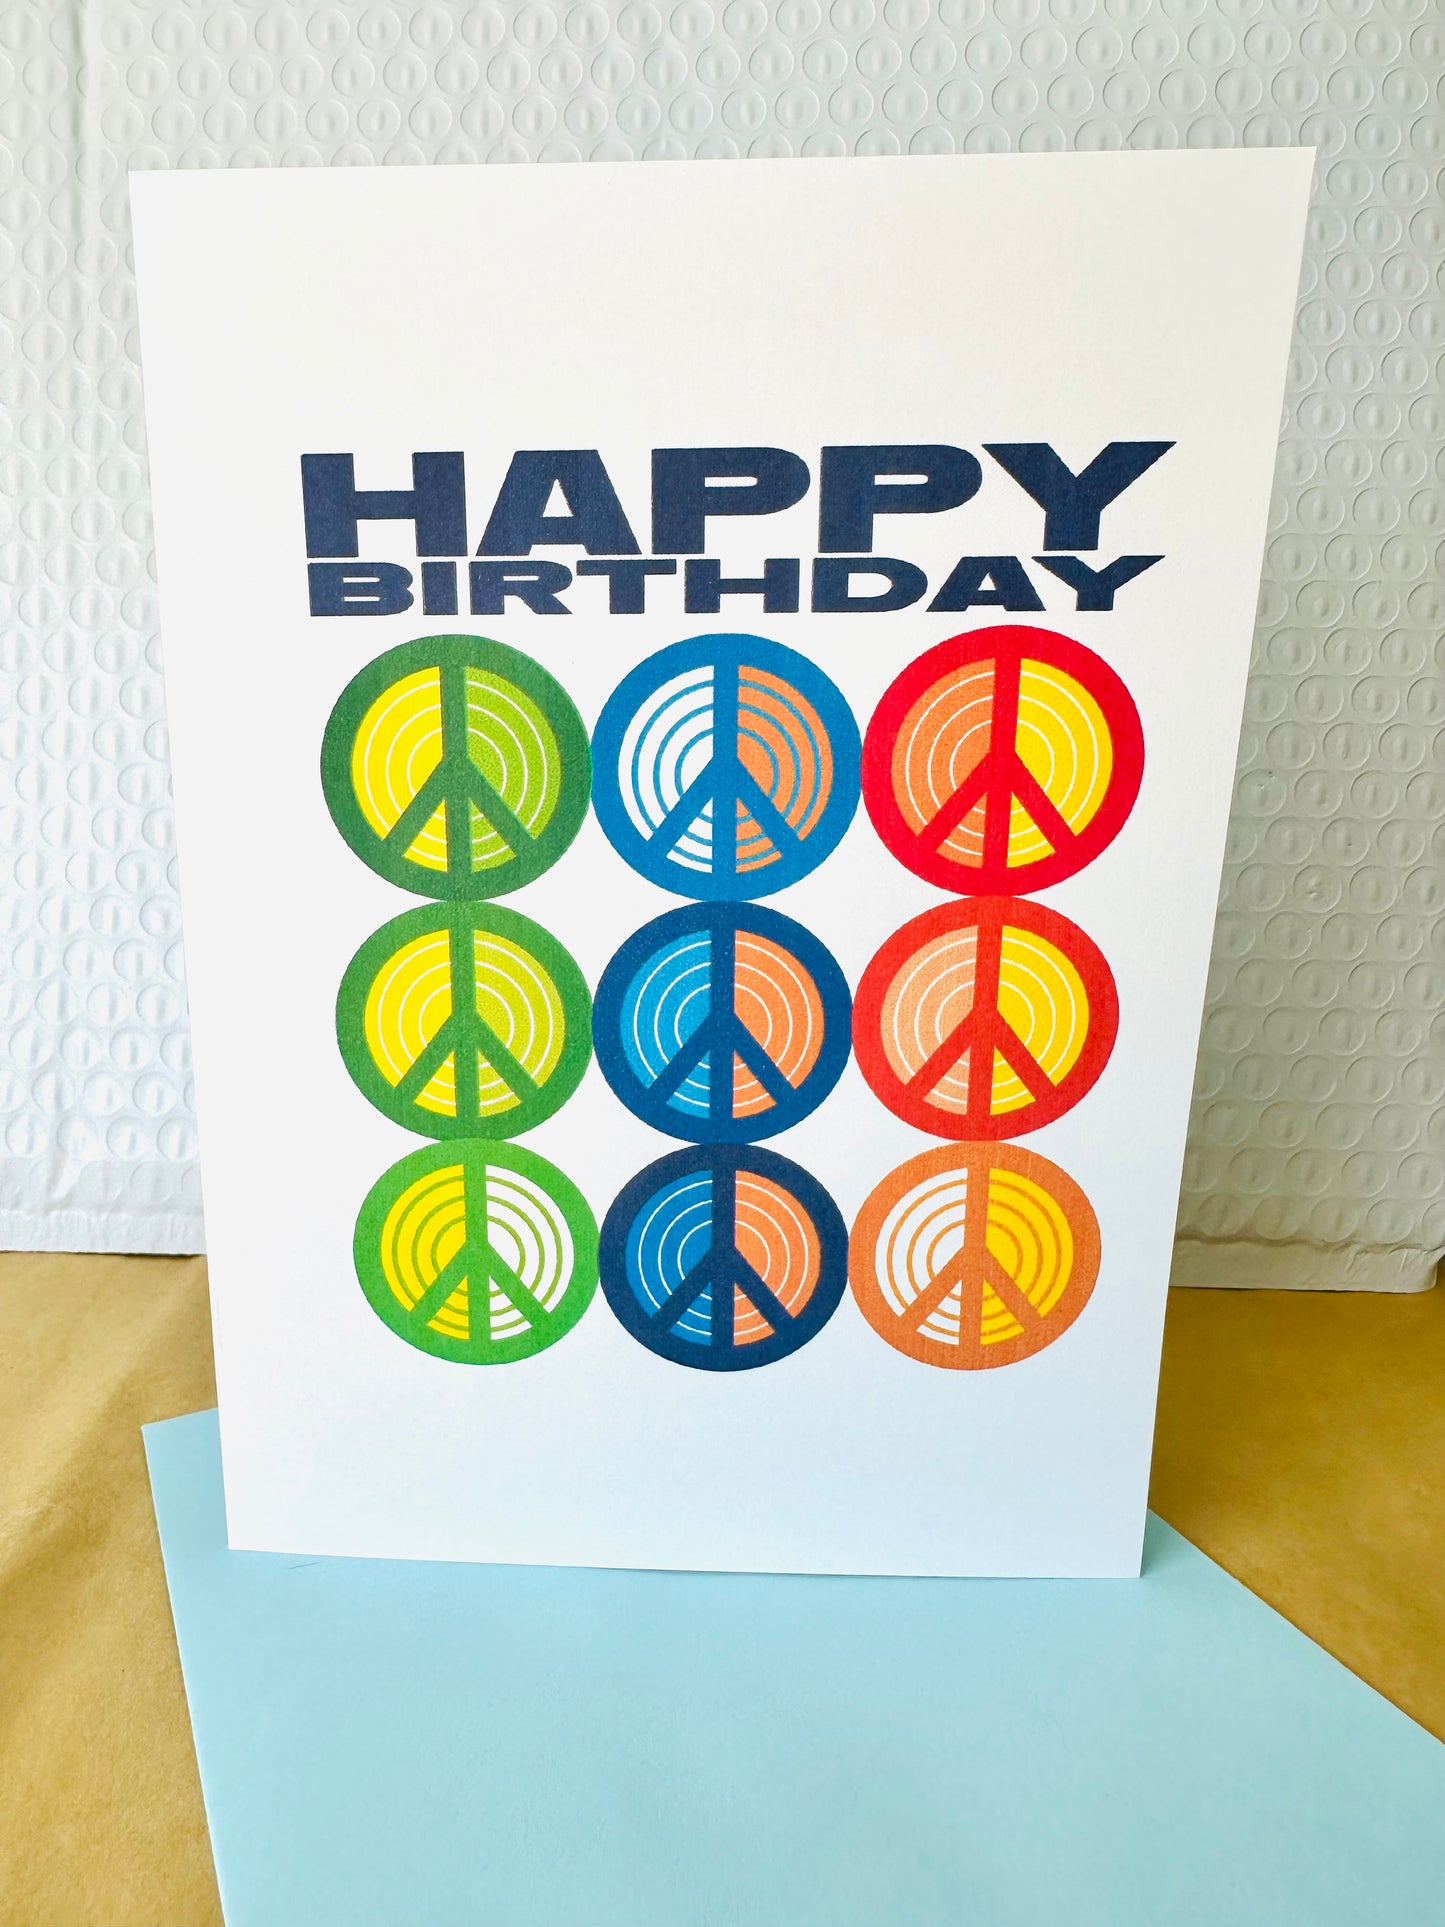 Happy Birthday & HBD Vibes! 70's inspired Multi Peace sign Greeting card 5x7 blank inside